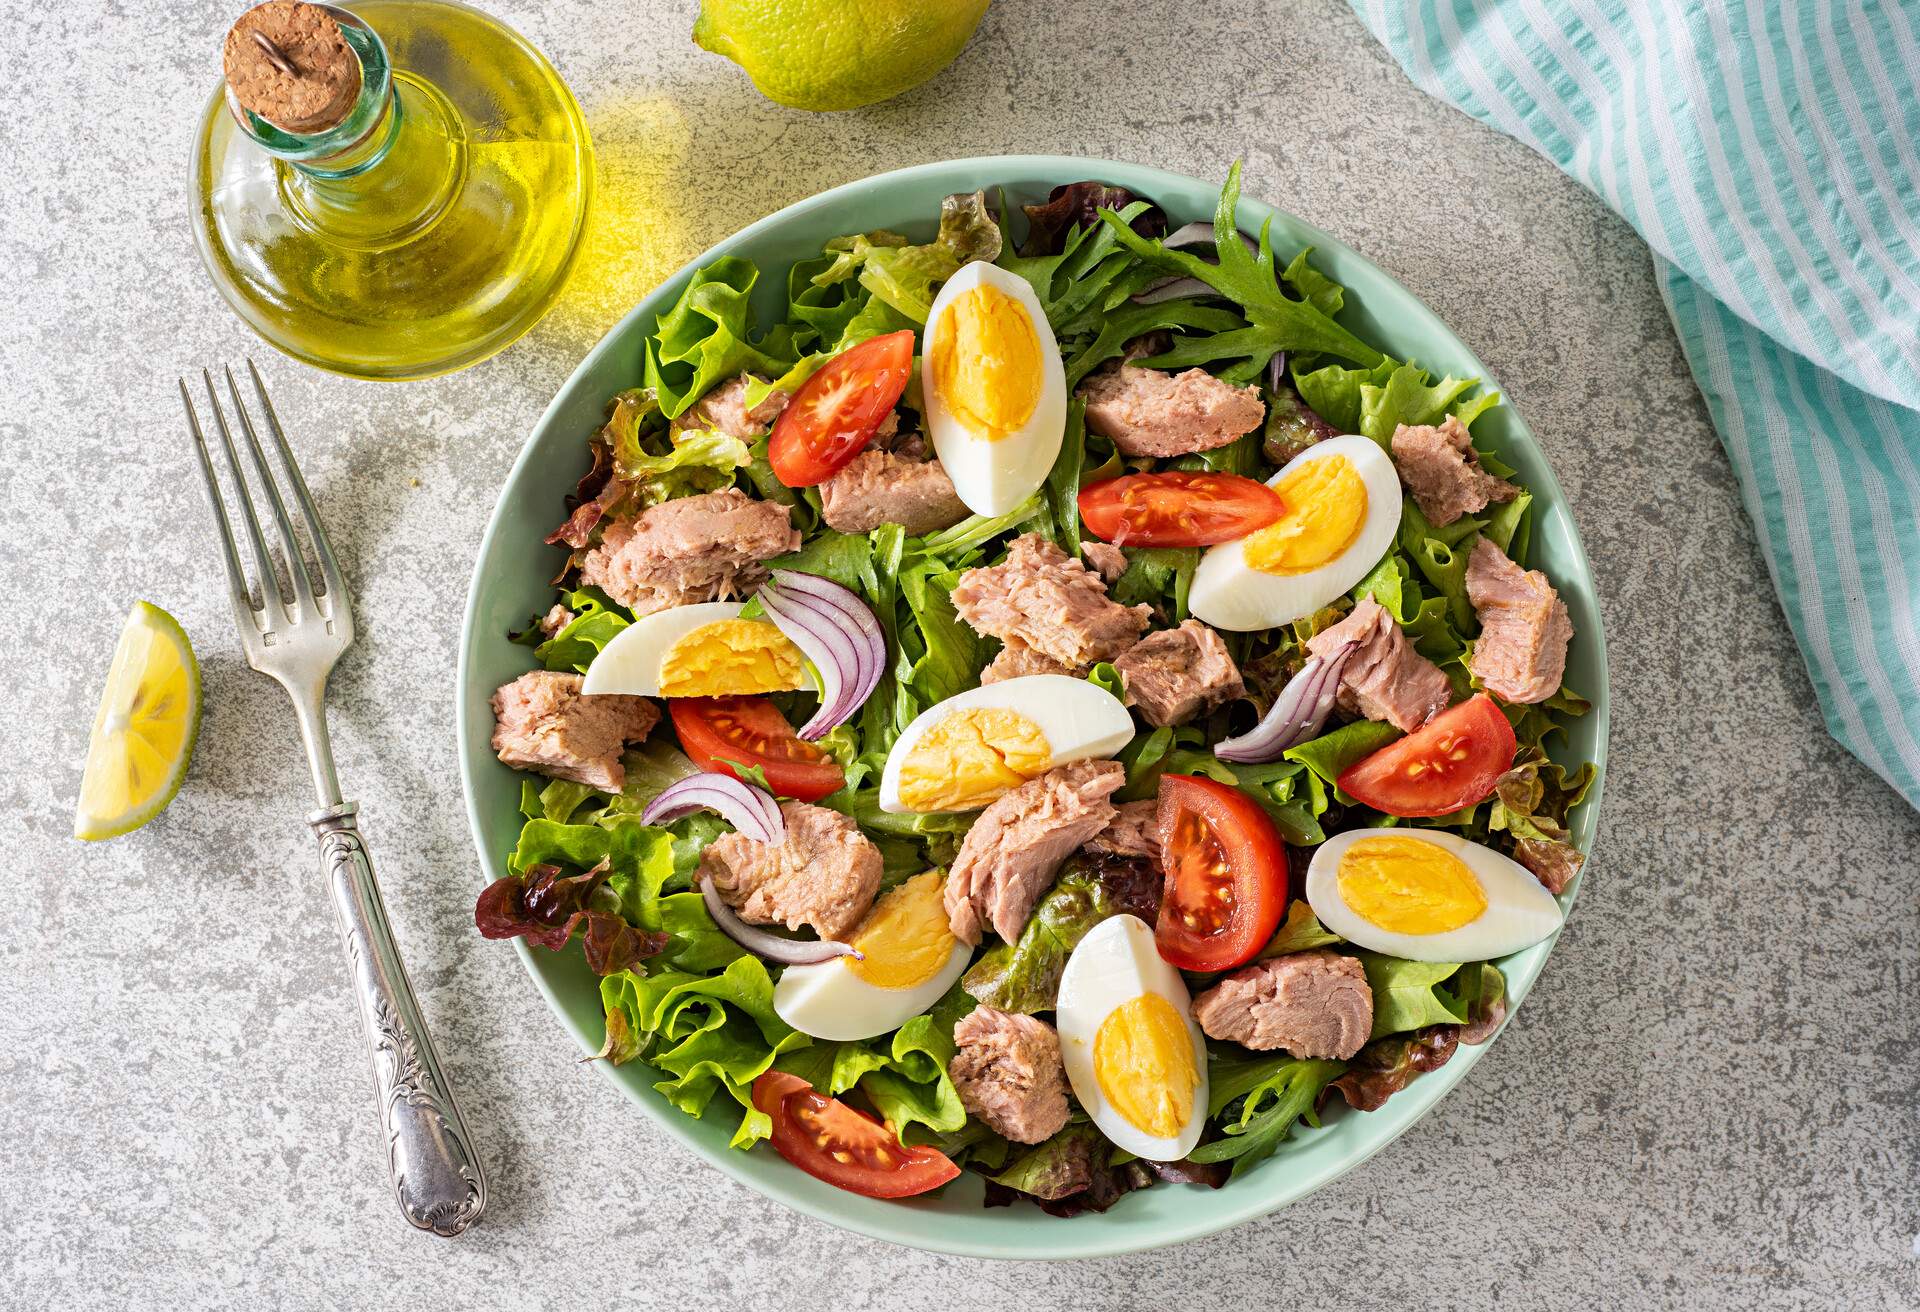 THEME_FOOD_FRENCH_Salade-Nicoise_GettyImages-1194074127